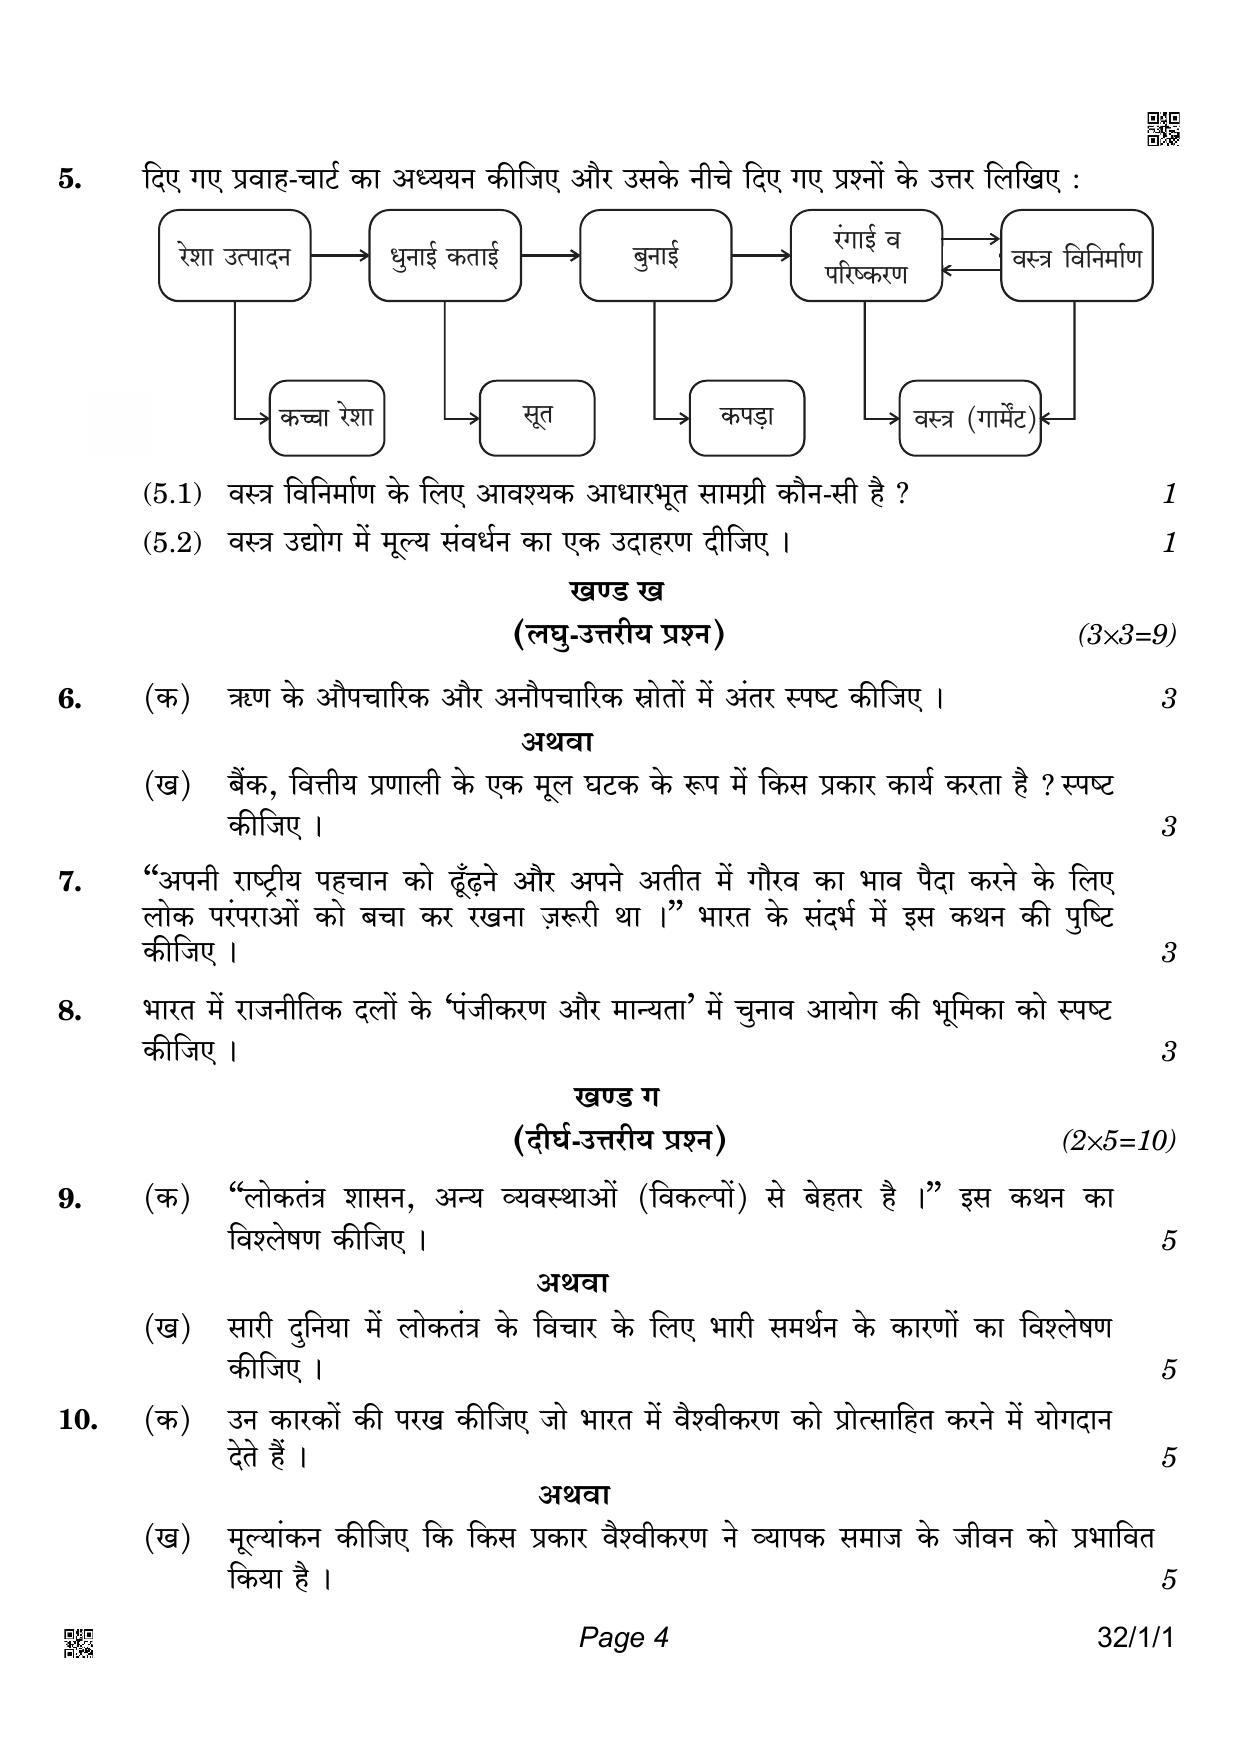 CBSE Class 10 32-1-1 Social Science 2022 Question Paper - Page 4